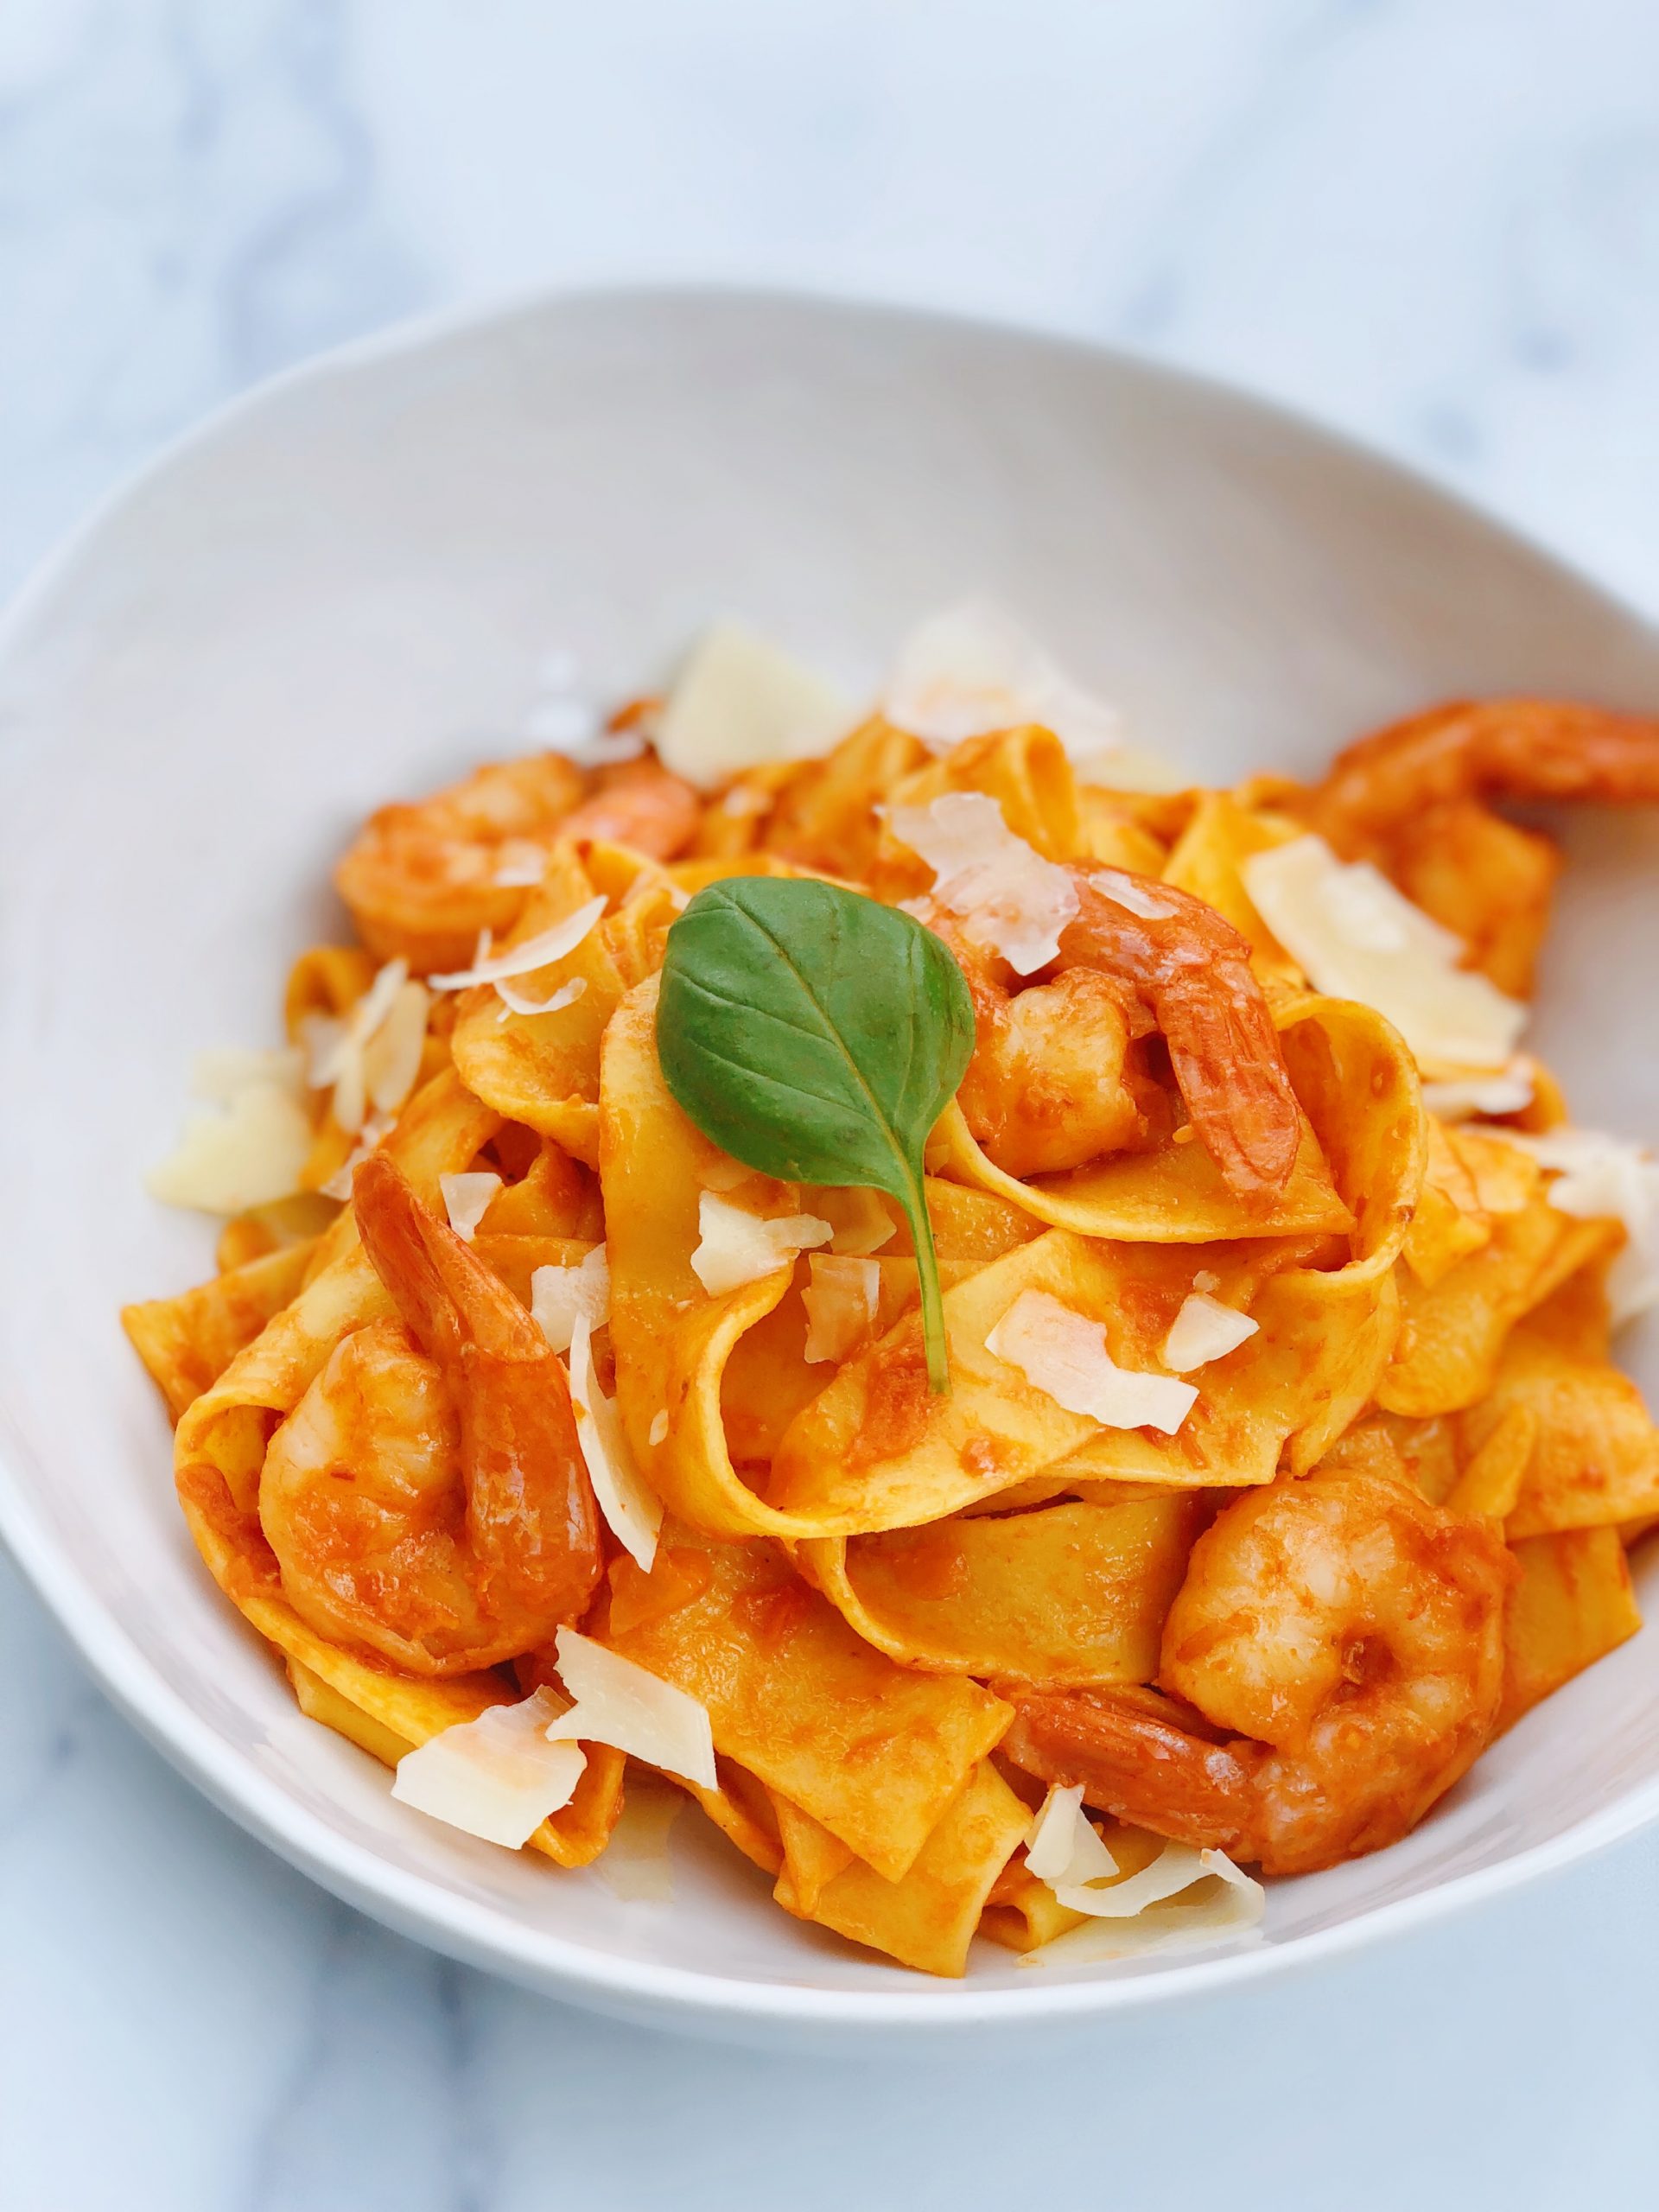 Dish of Shrimp Pappardelle with Vodka Sauce